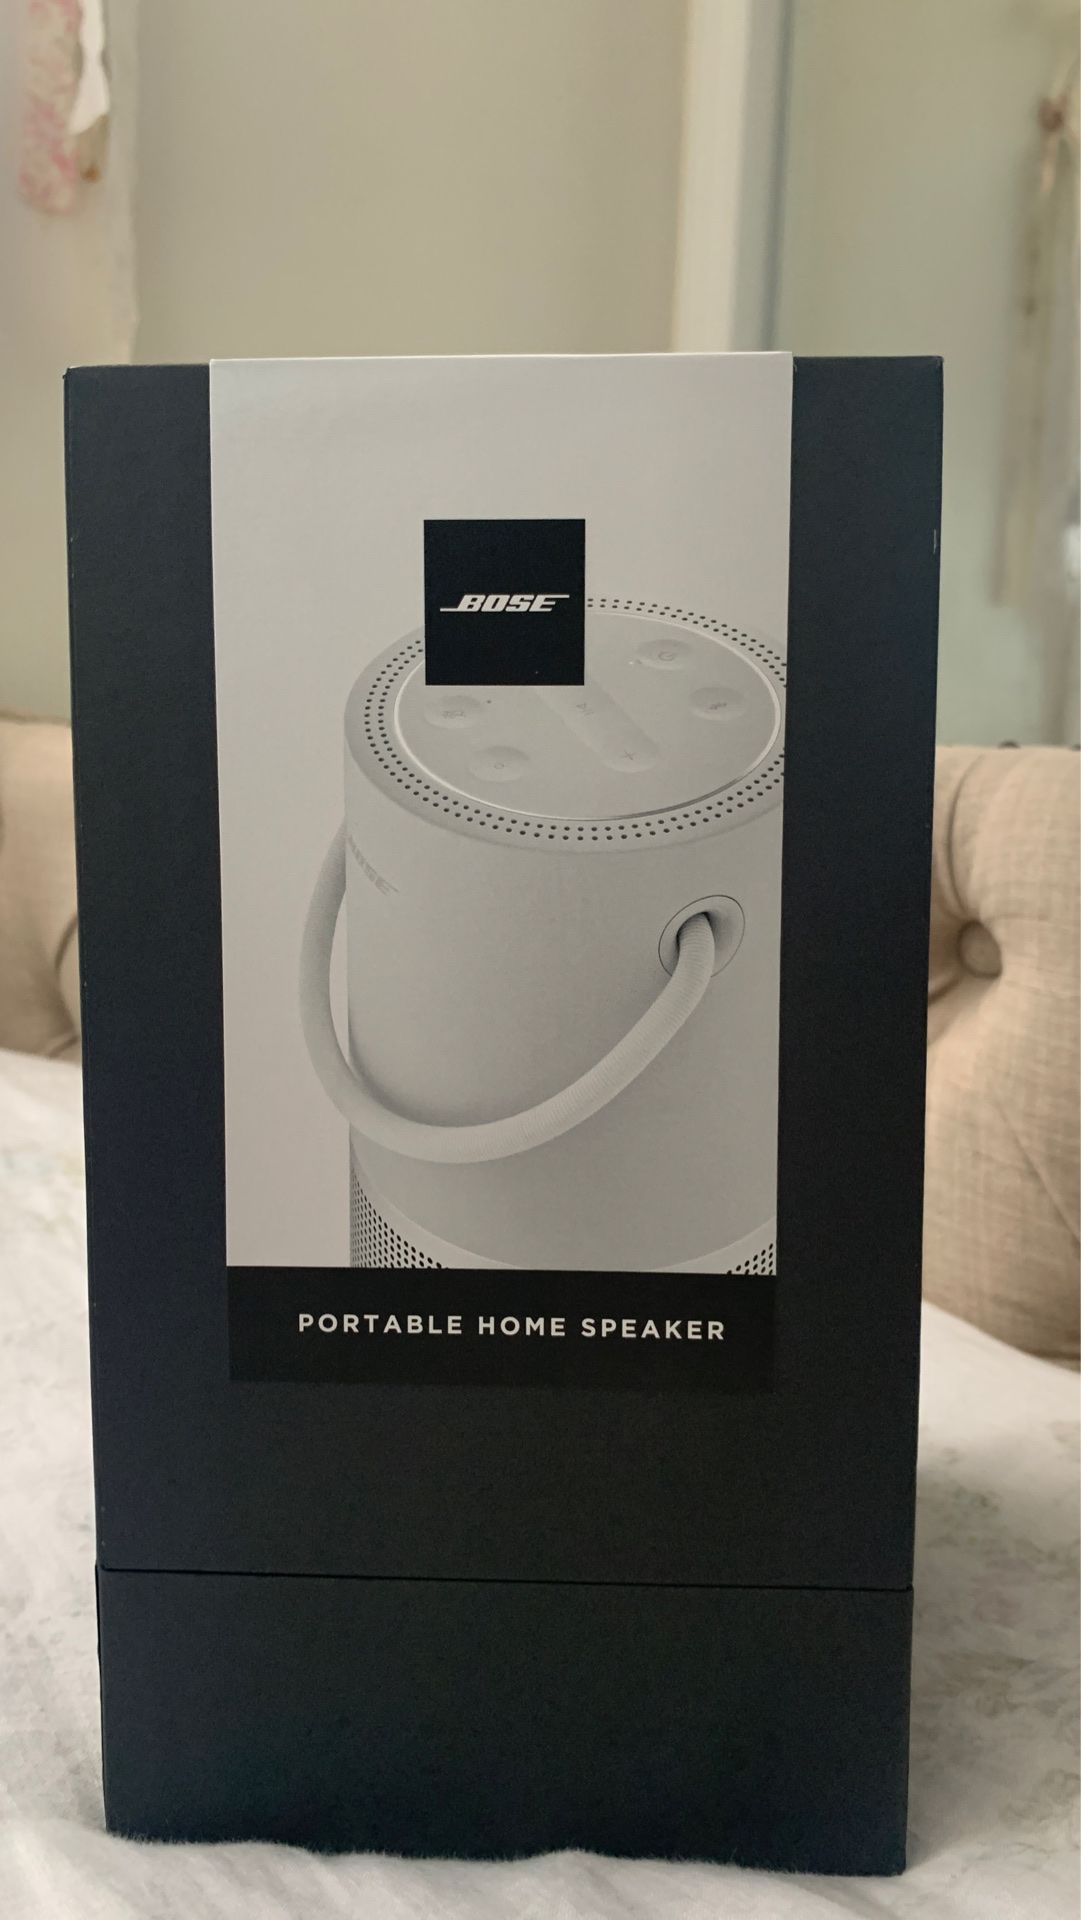 Bose Portable Home Speaker with portable home speaker charging cradle